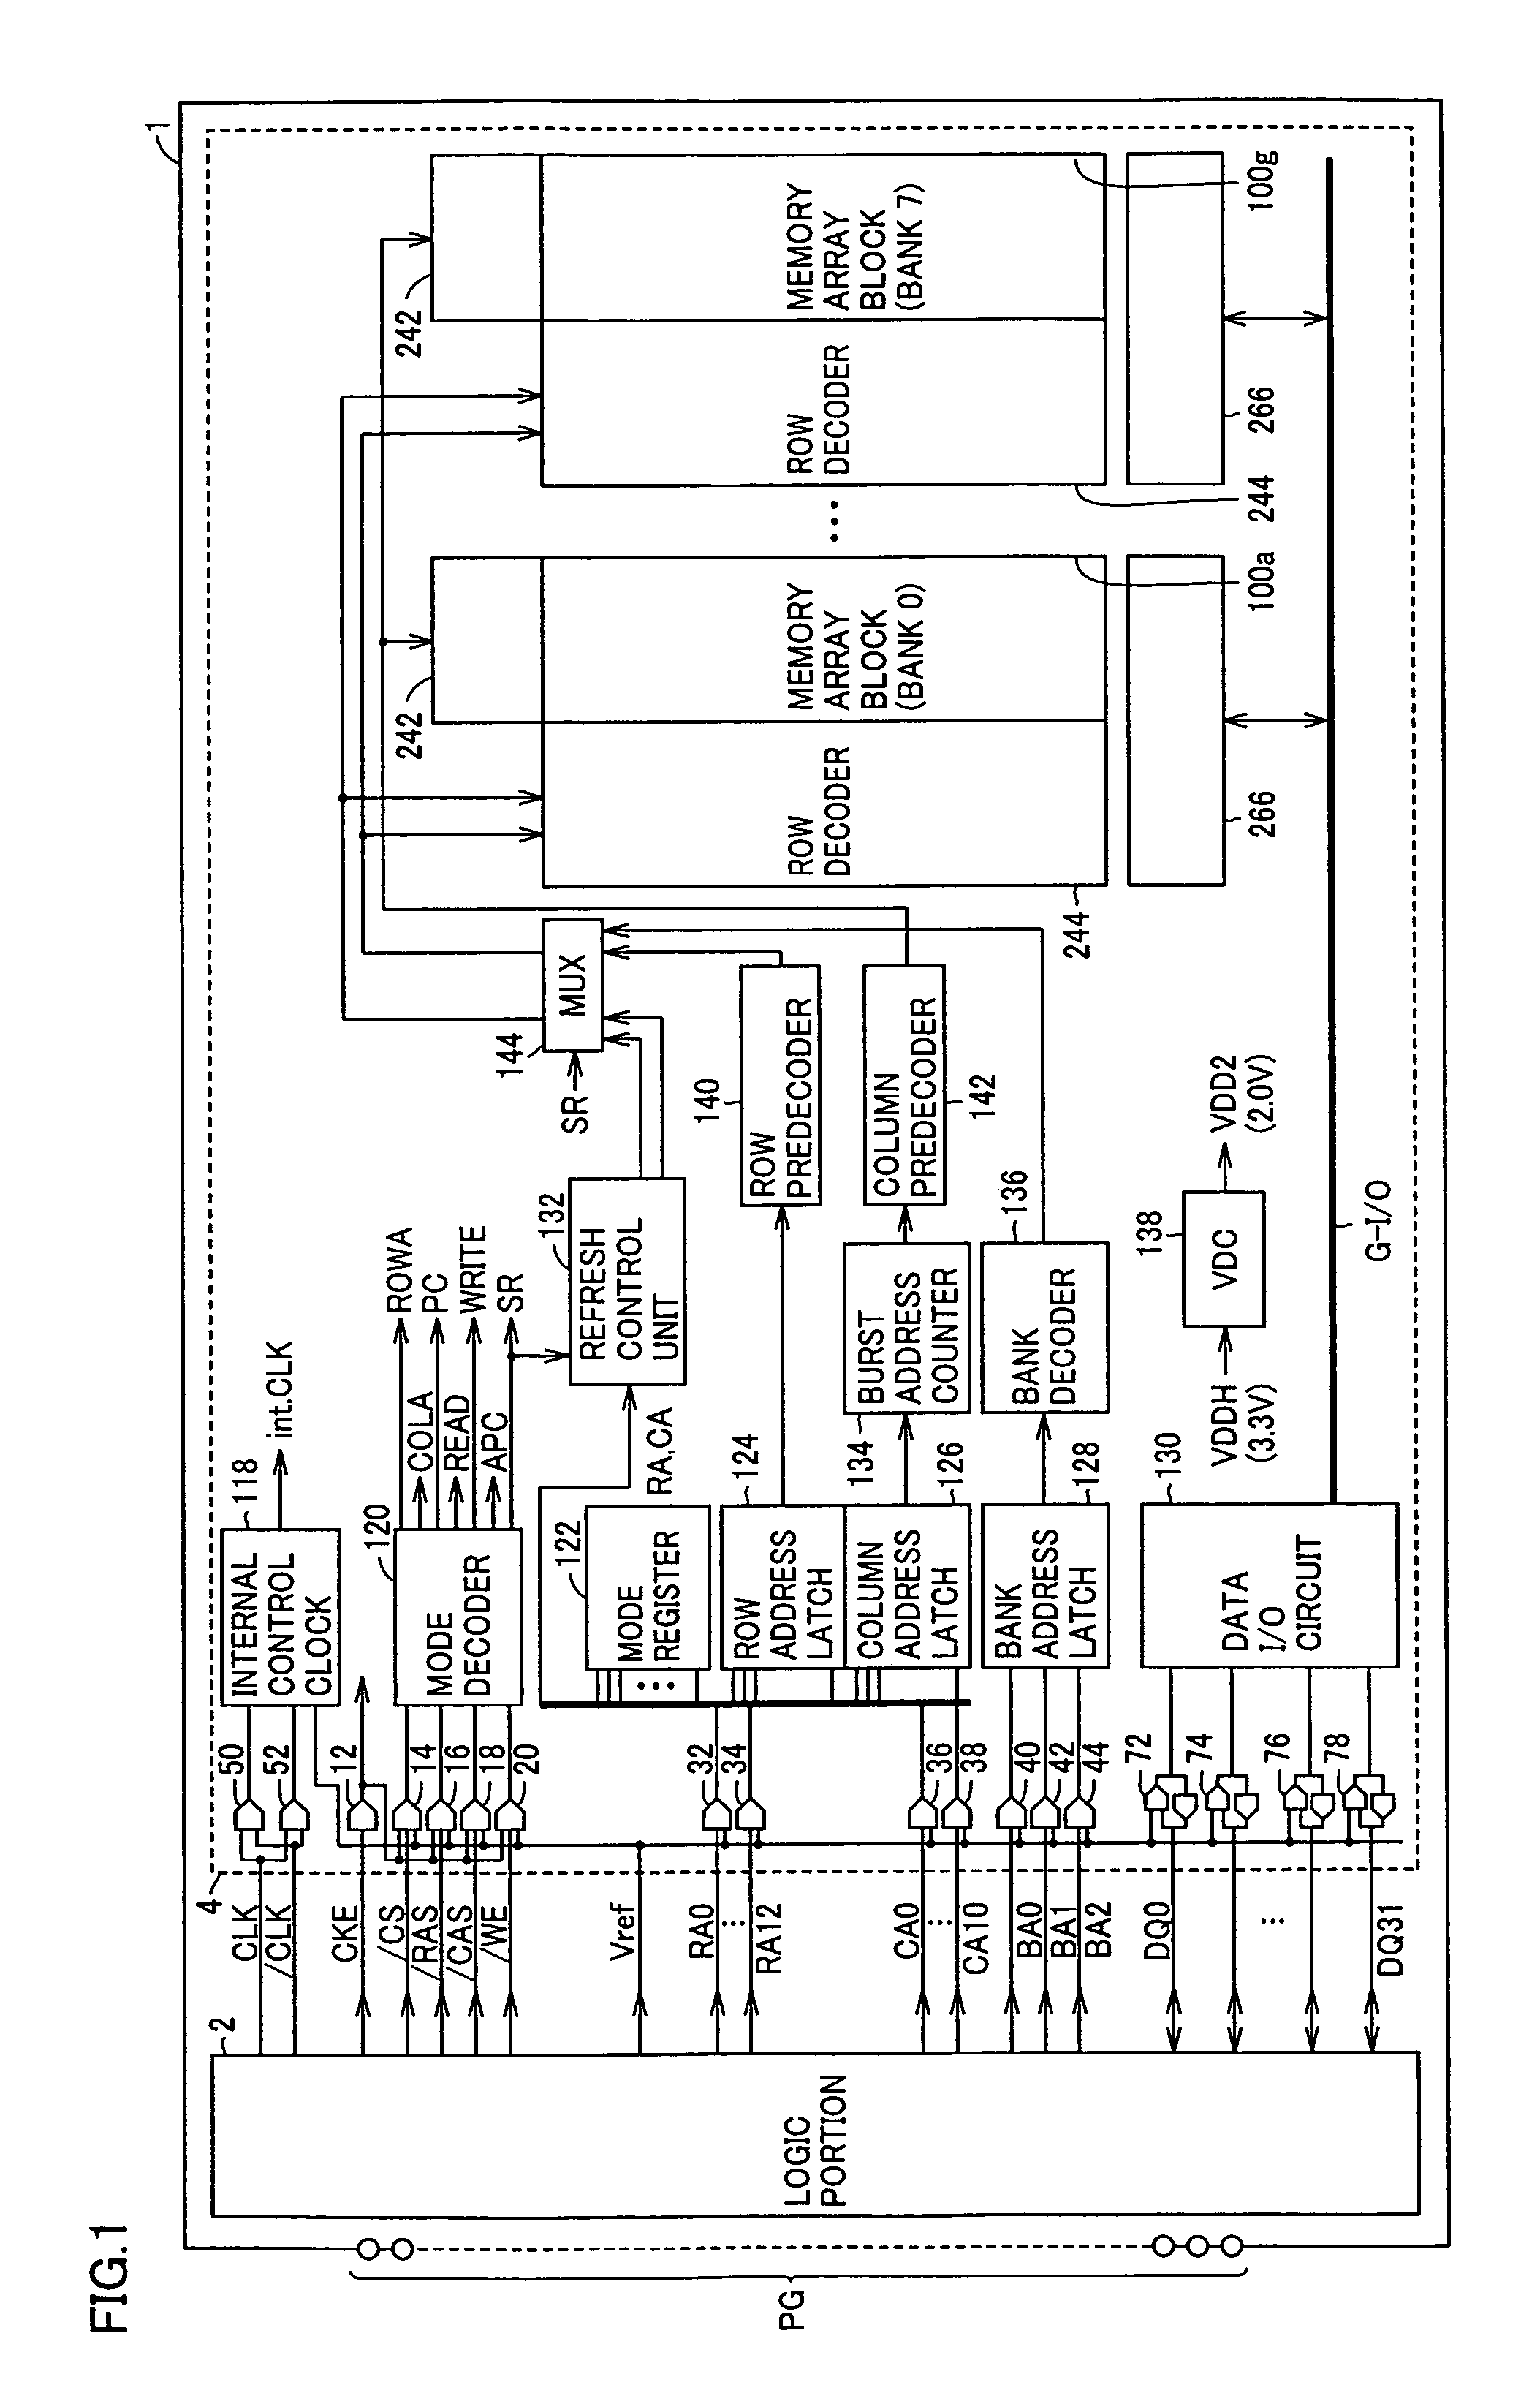 Semiconductor device with reduced current consumption in standby state